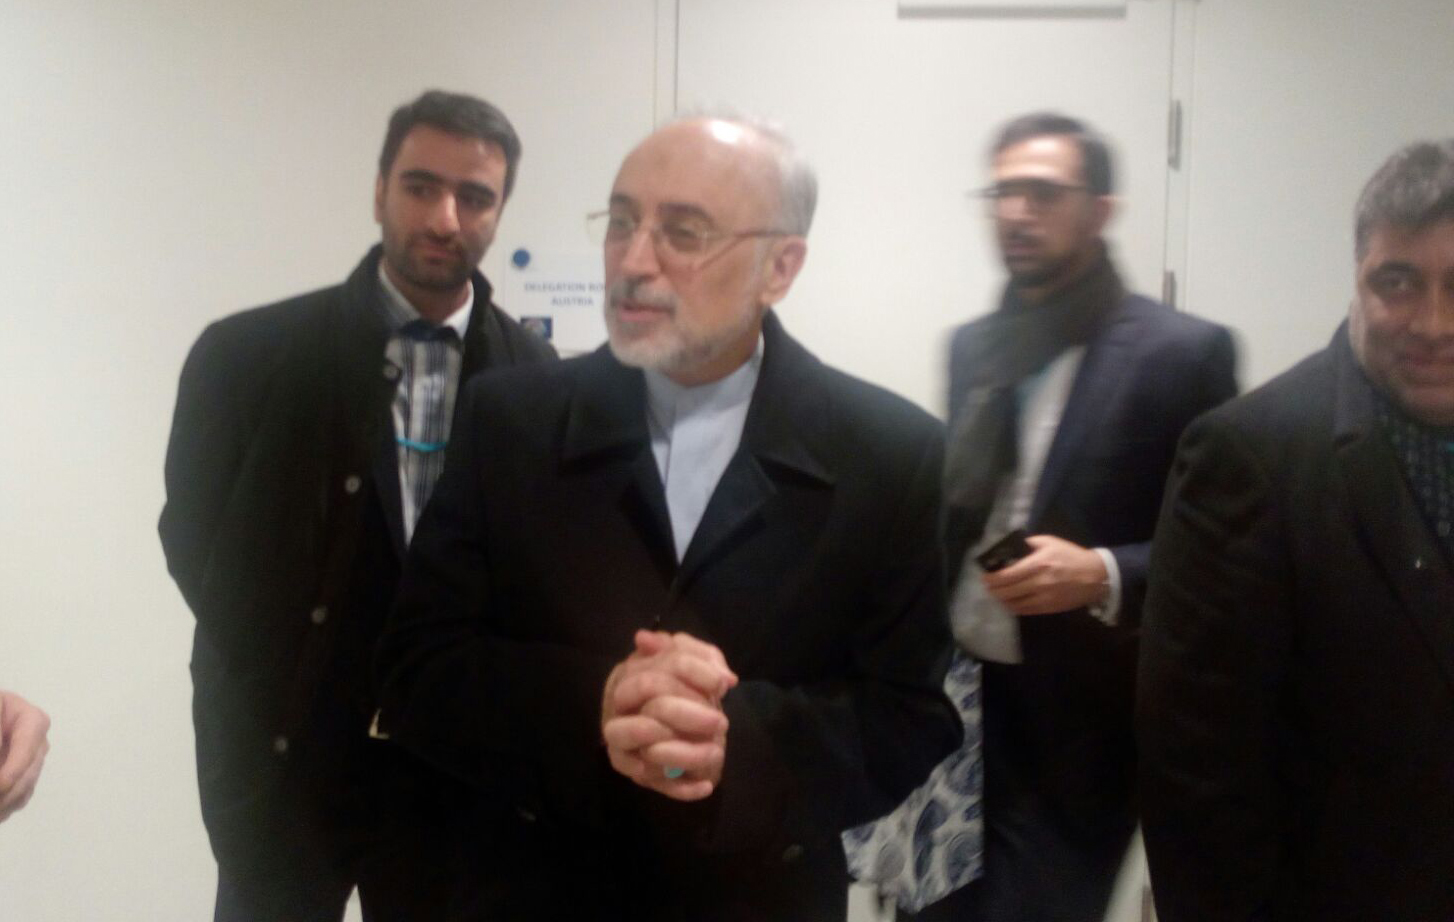 Head of the Atomic Energy Organization of Iran (AEOI) Ali Akbar Salehi during participation in the 2nd International Conference on Nuclear Security